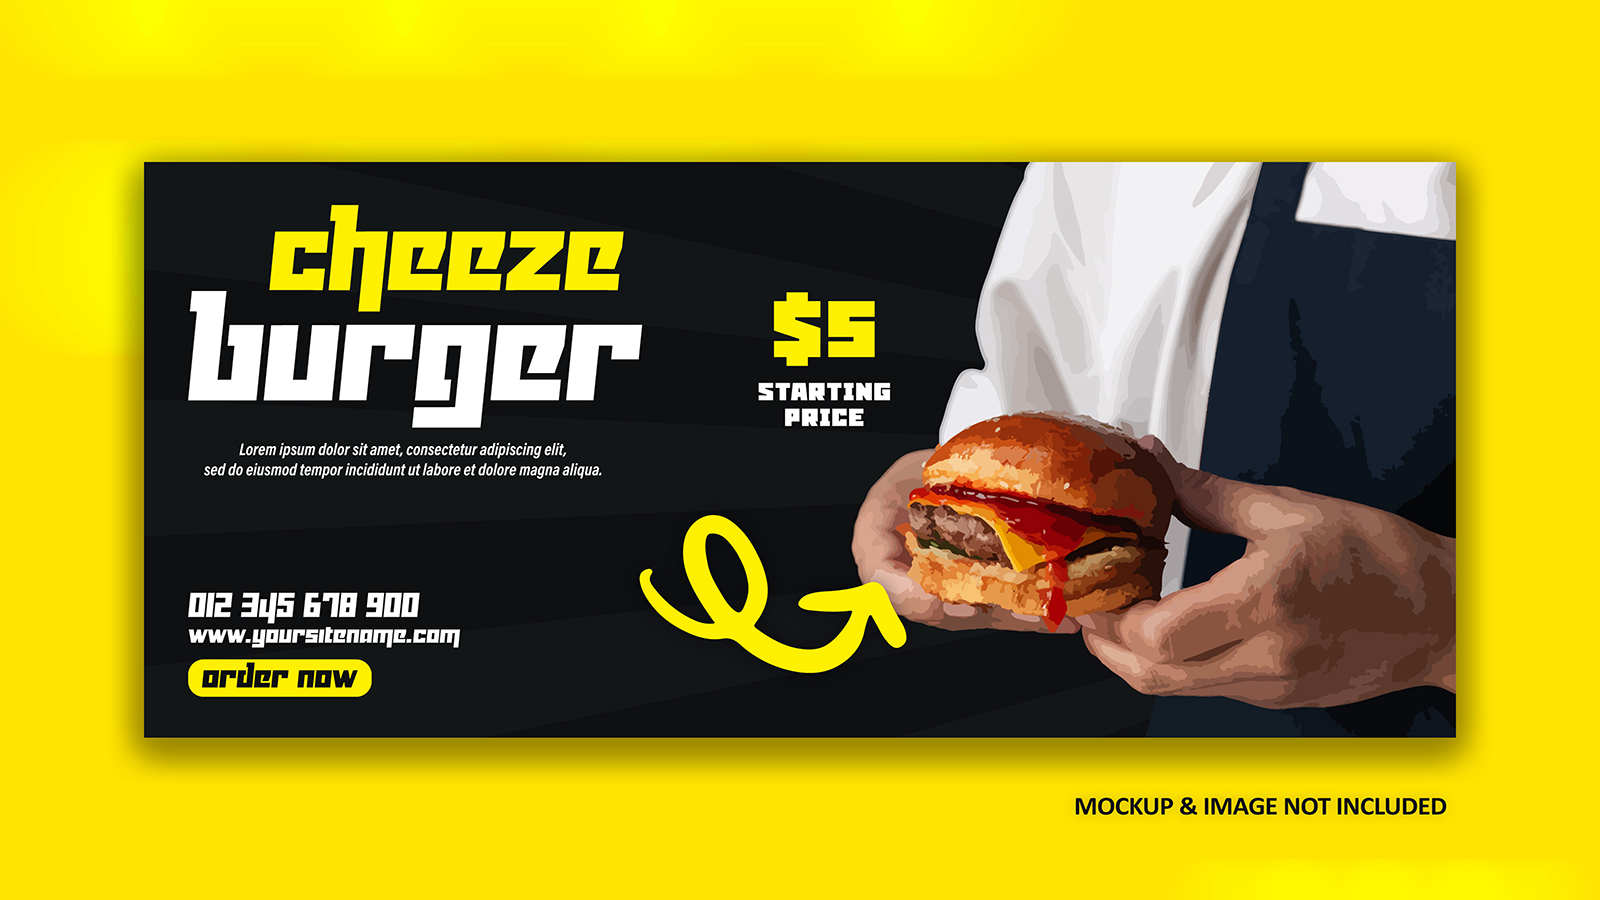 Cheeze pizza Social media ad cover banner design EPS template